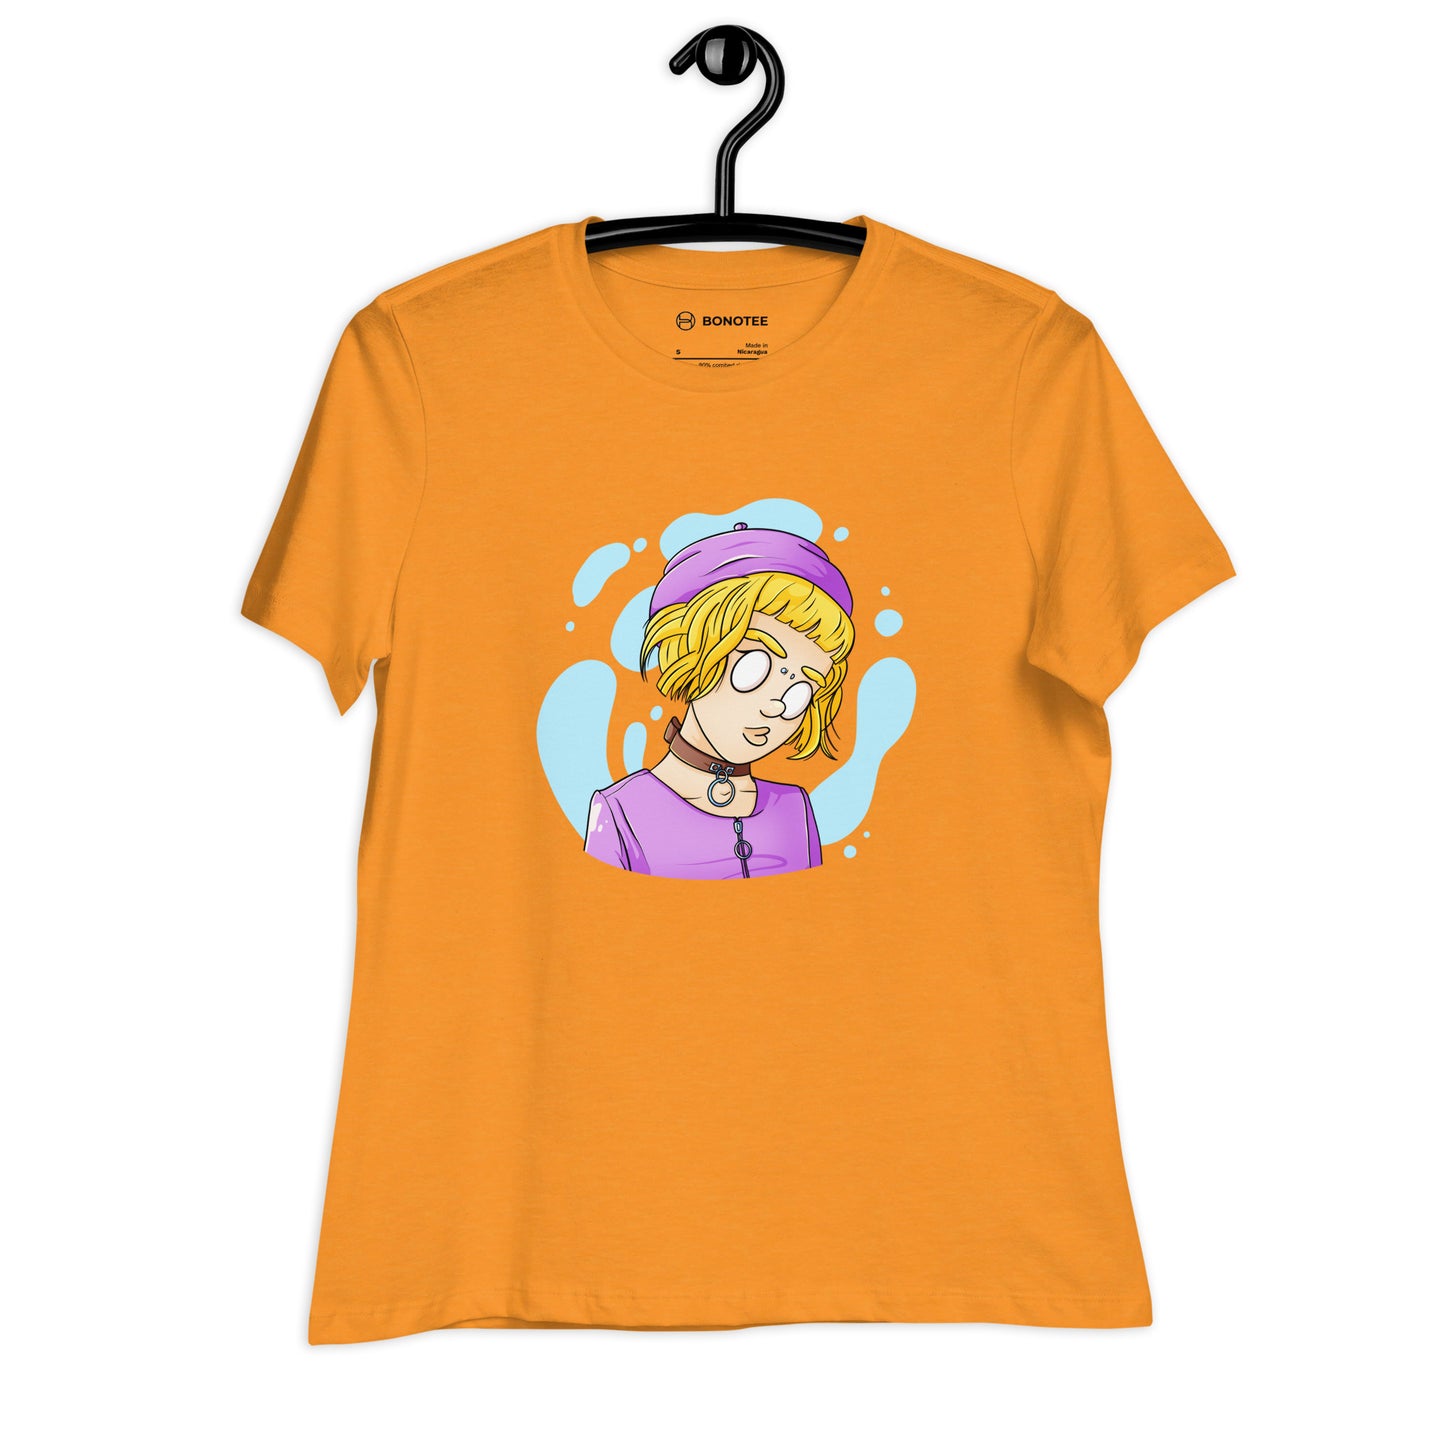 womens-relaxed-tshirt-zombie-mode-heather-marmalade